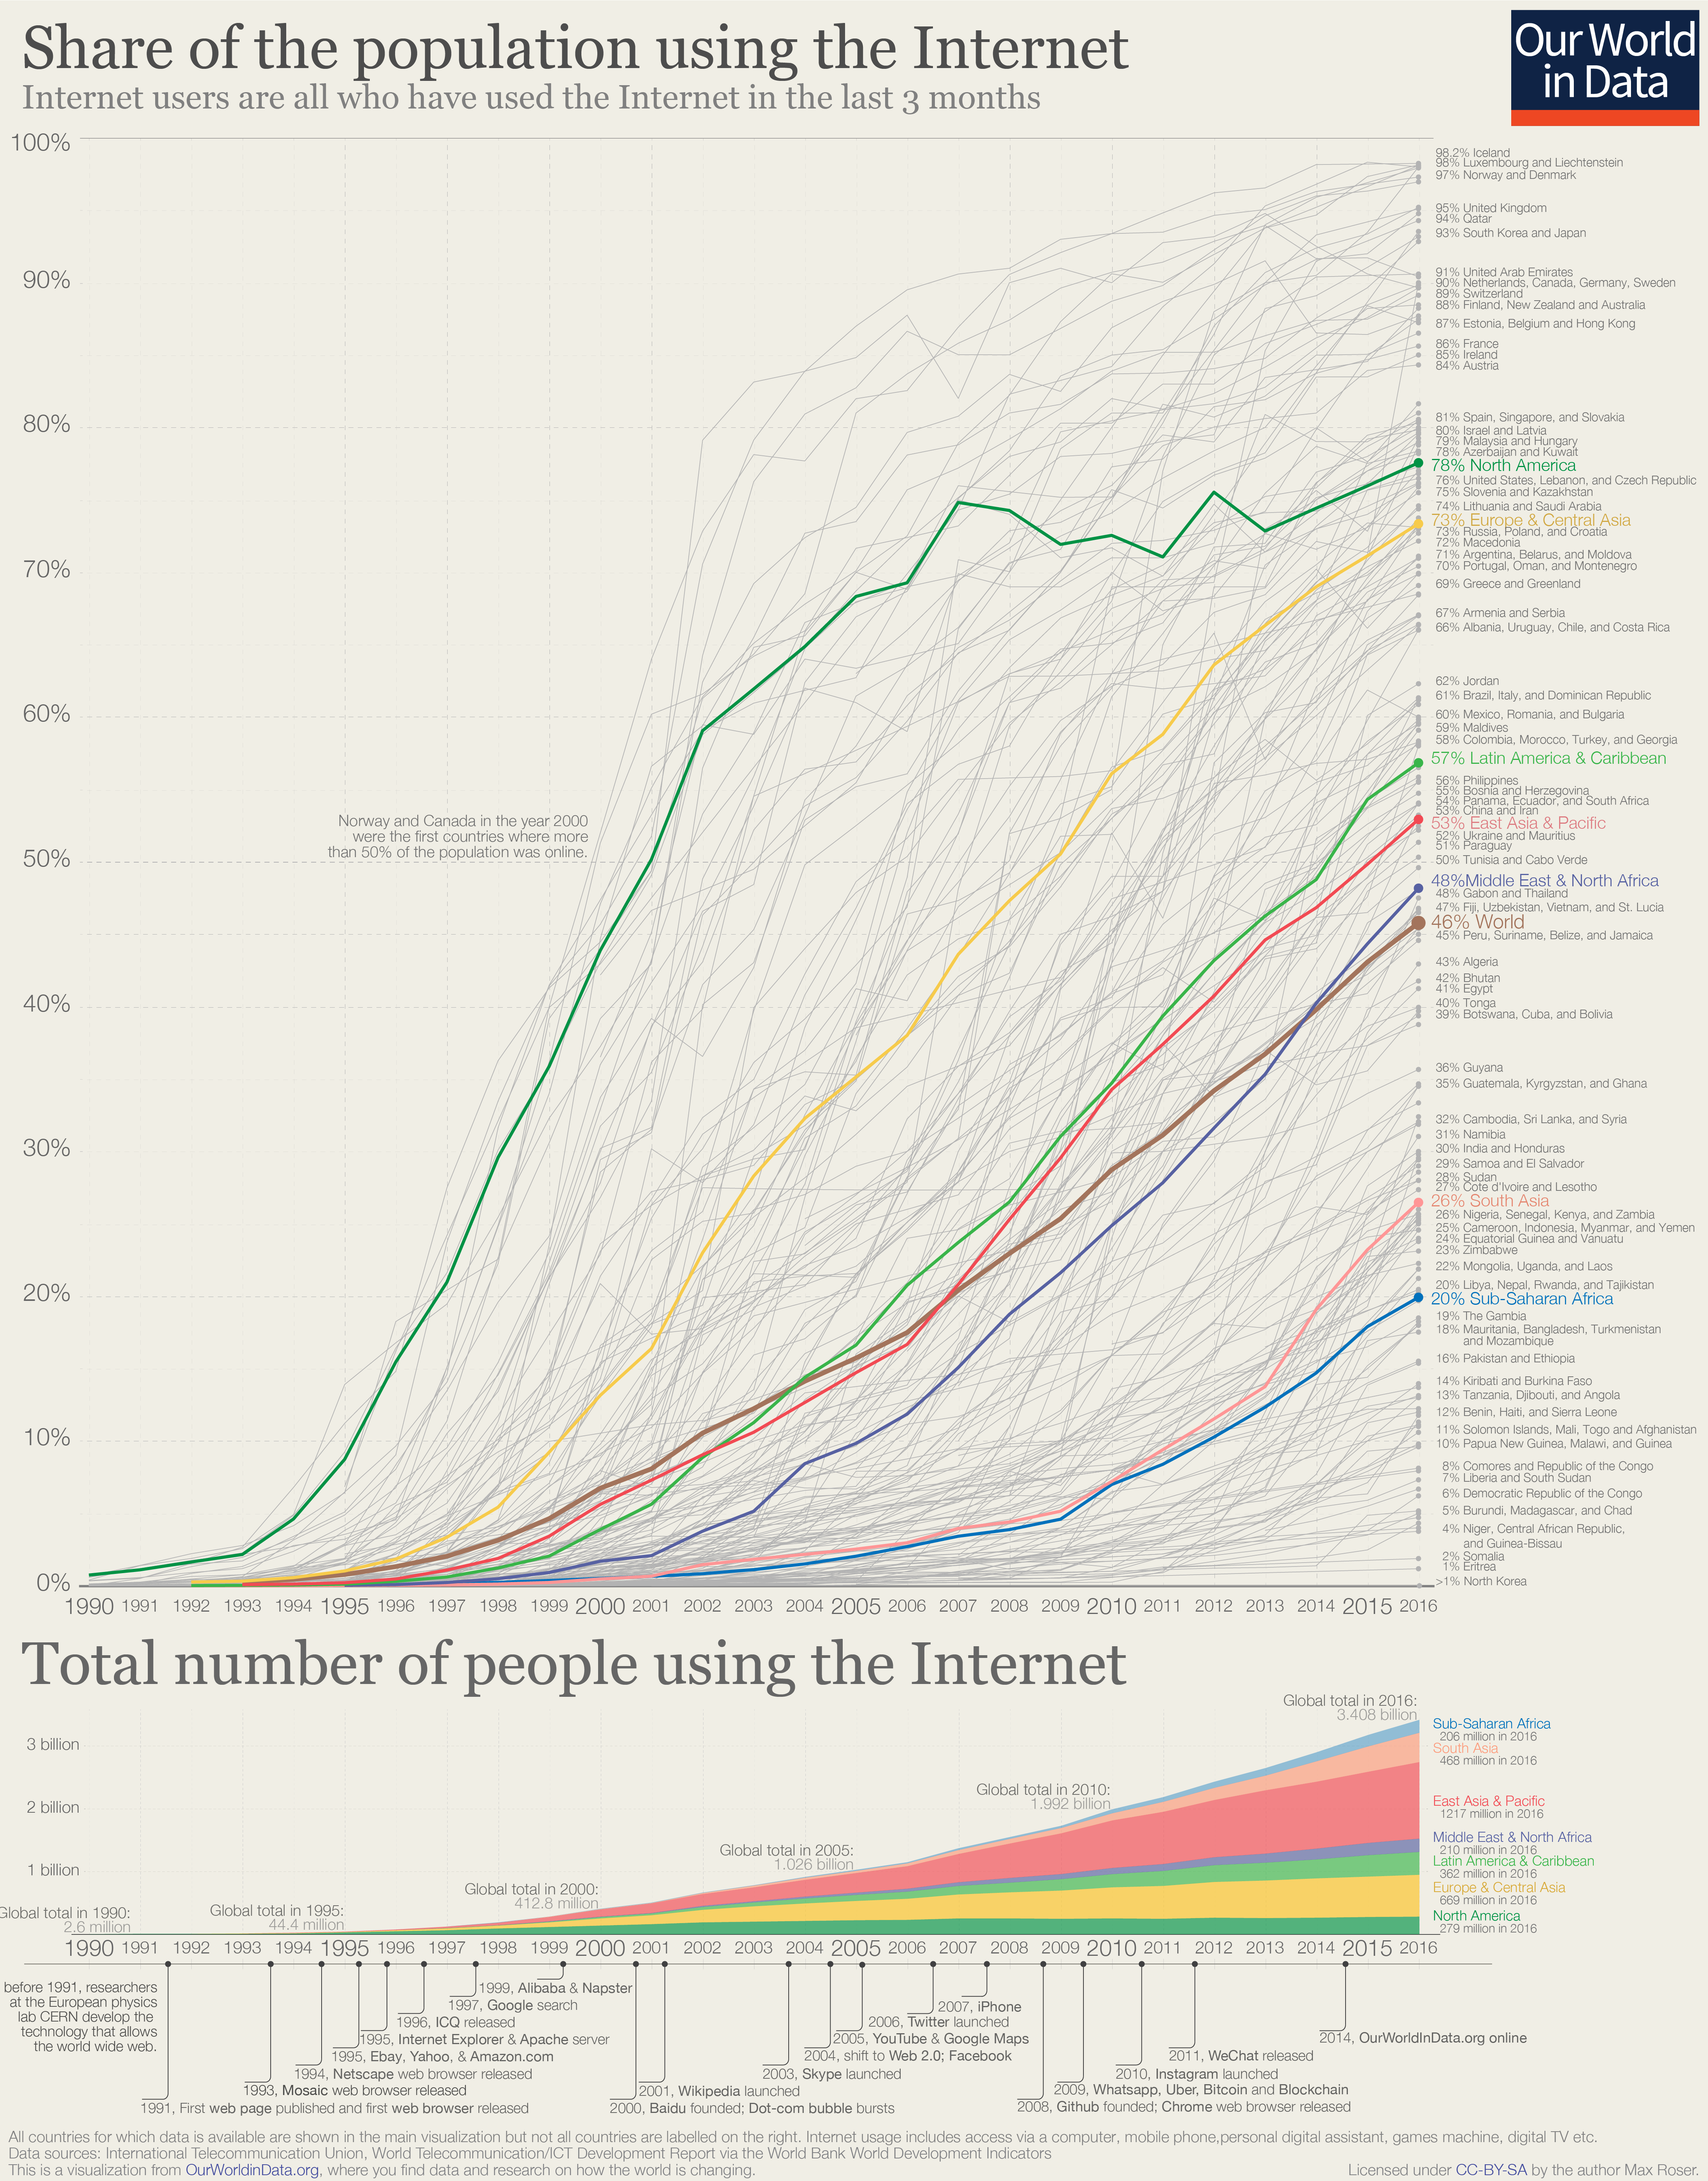 Share of internet users